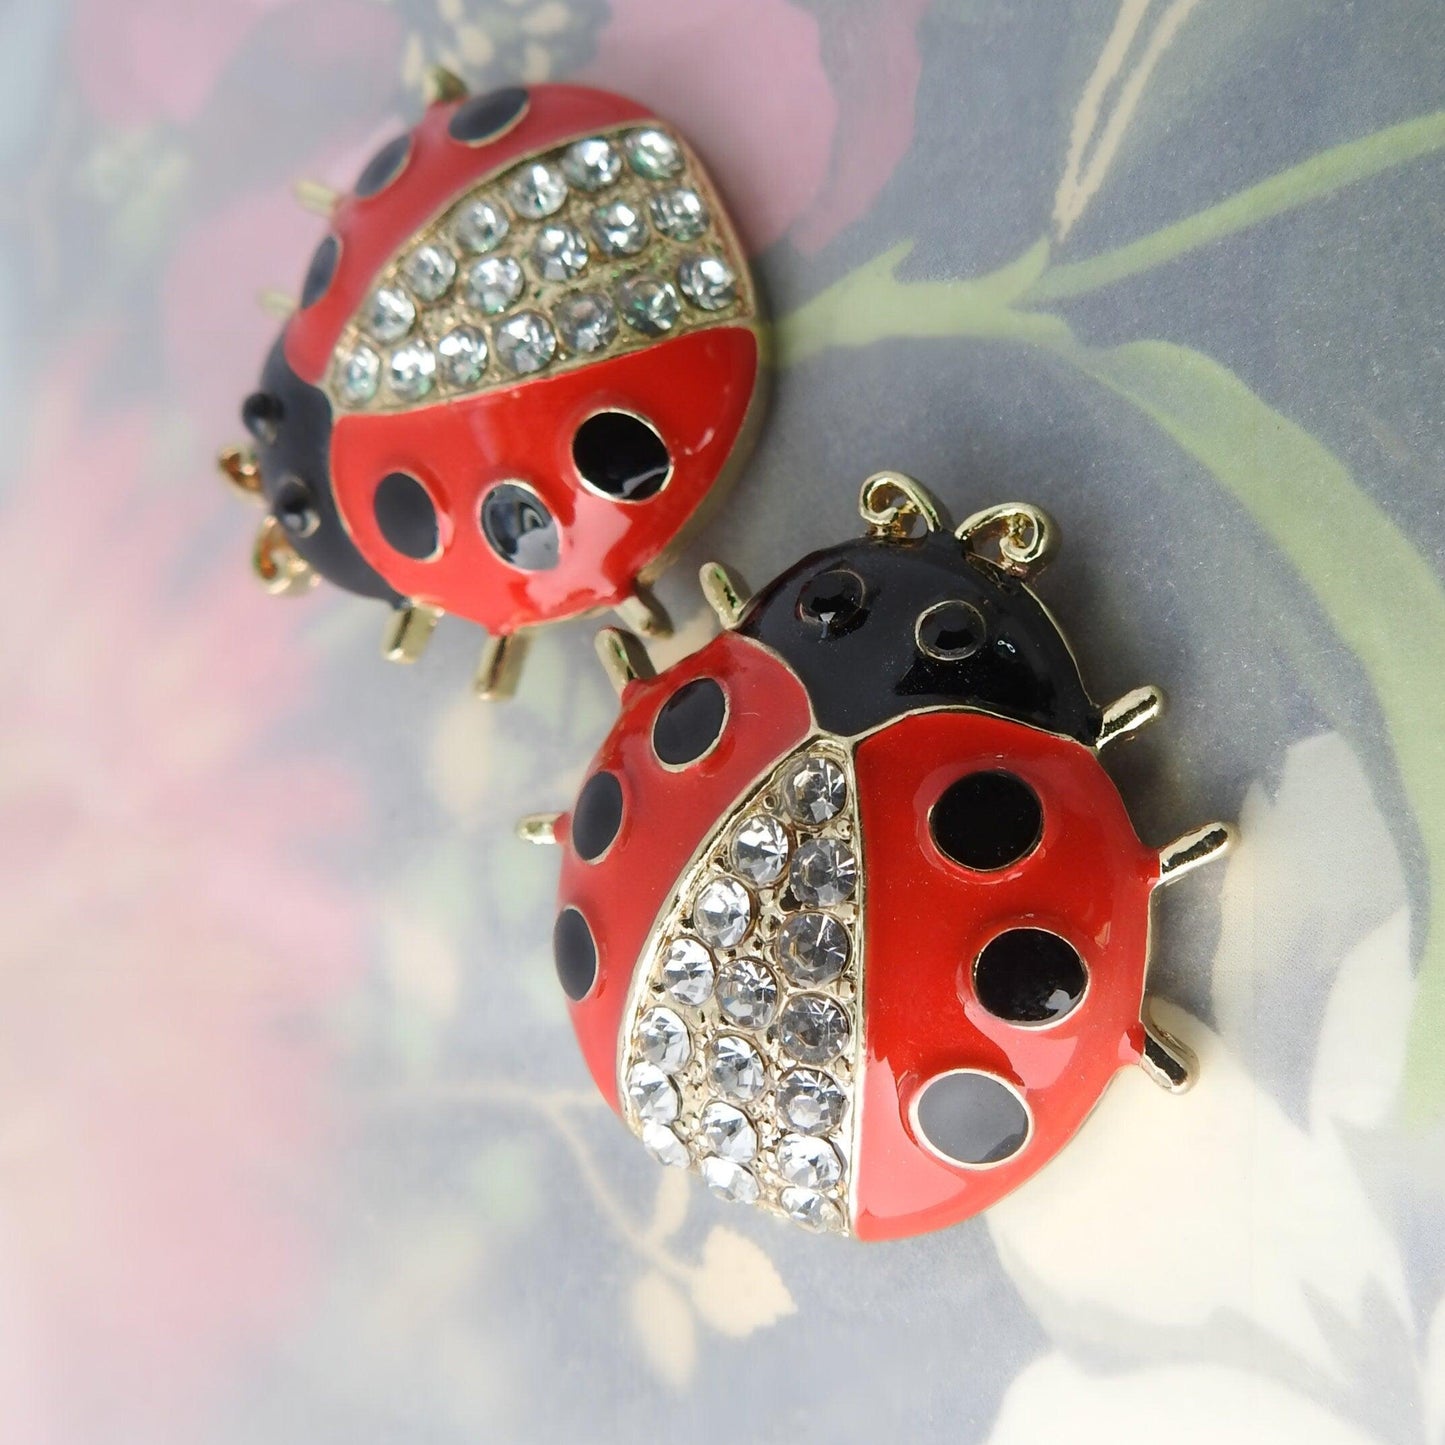 Red and black decorative ladybug buttons snap. Lot of 2. 30 mm. Ideal for lady bug snaps jewelry, insect-inspired fashion or fancy costume